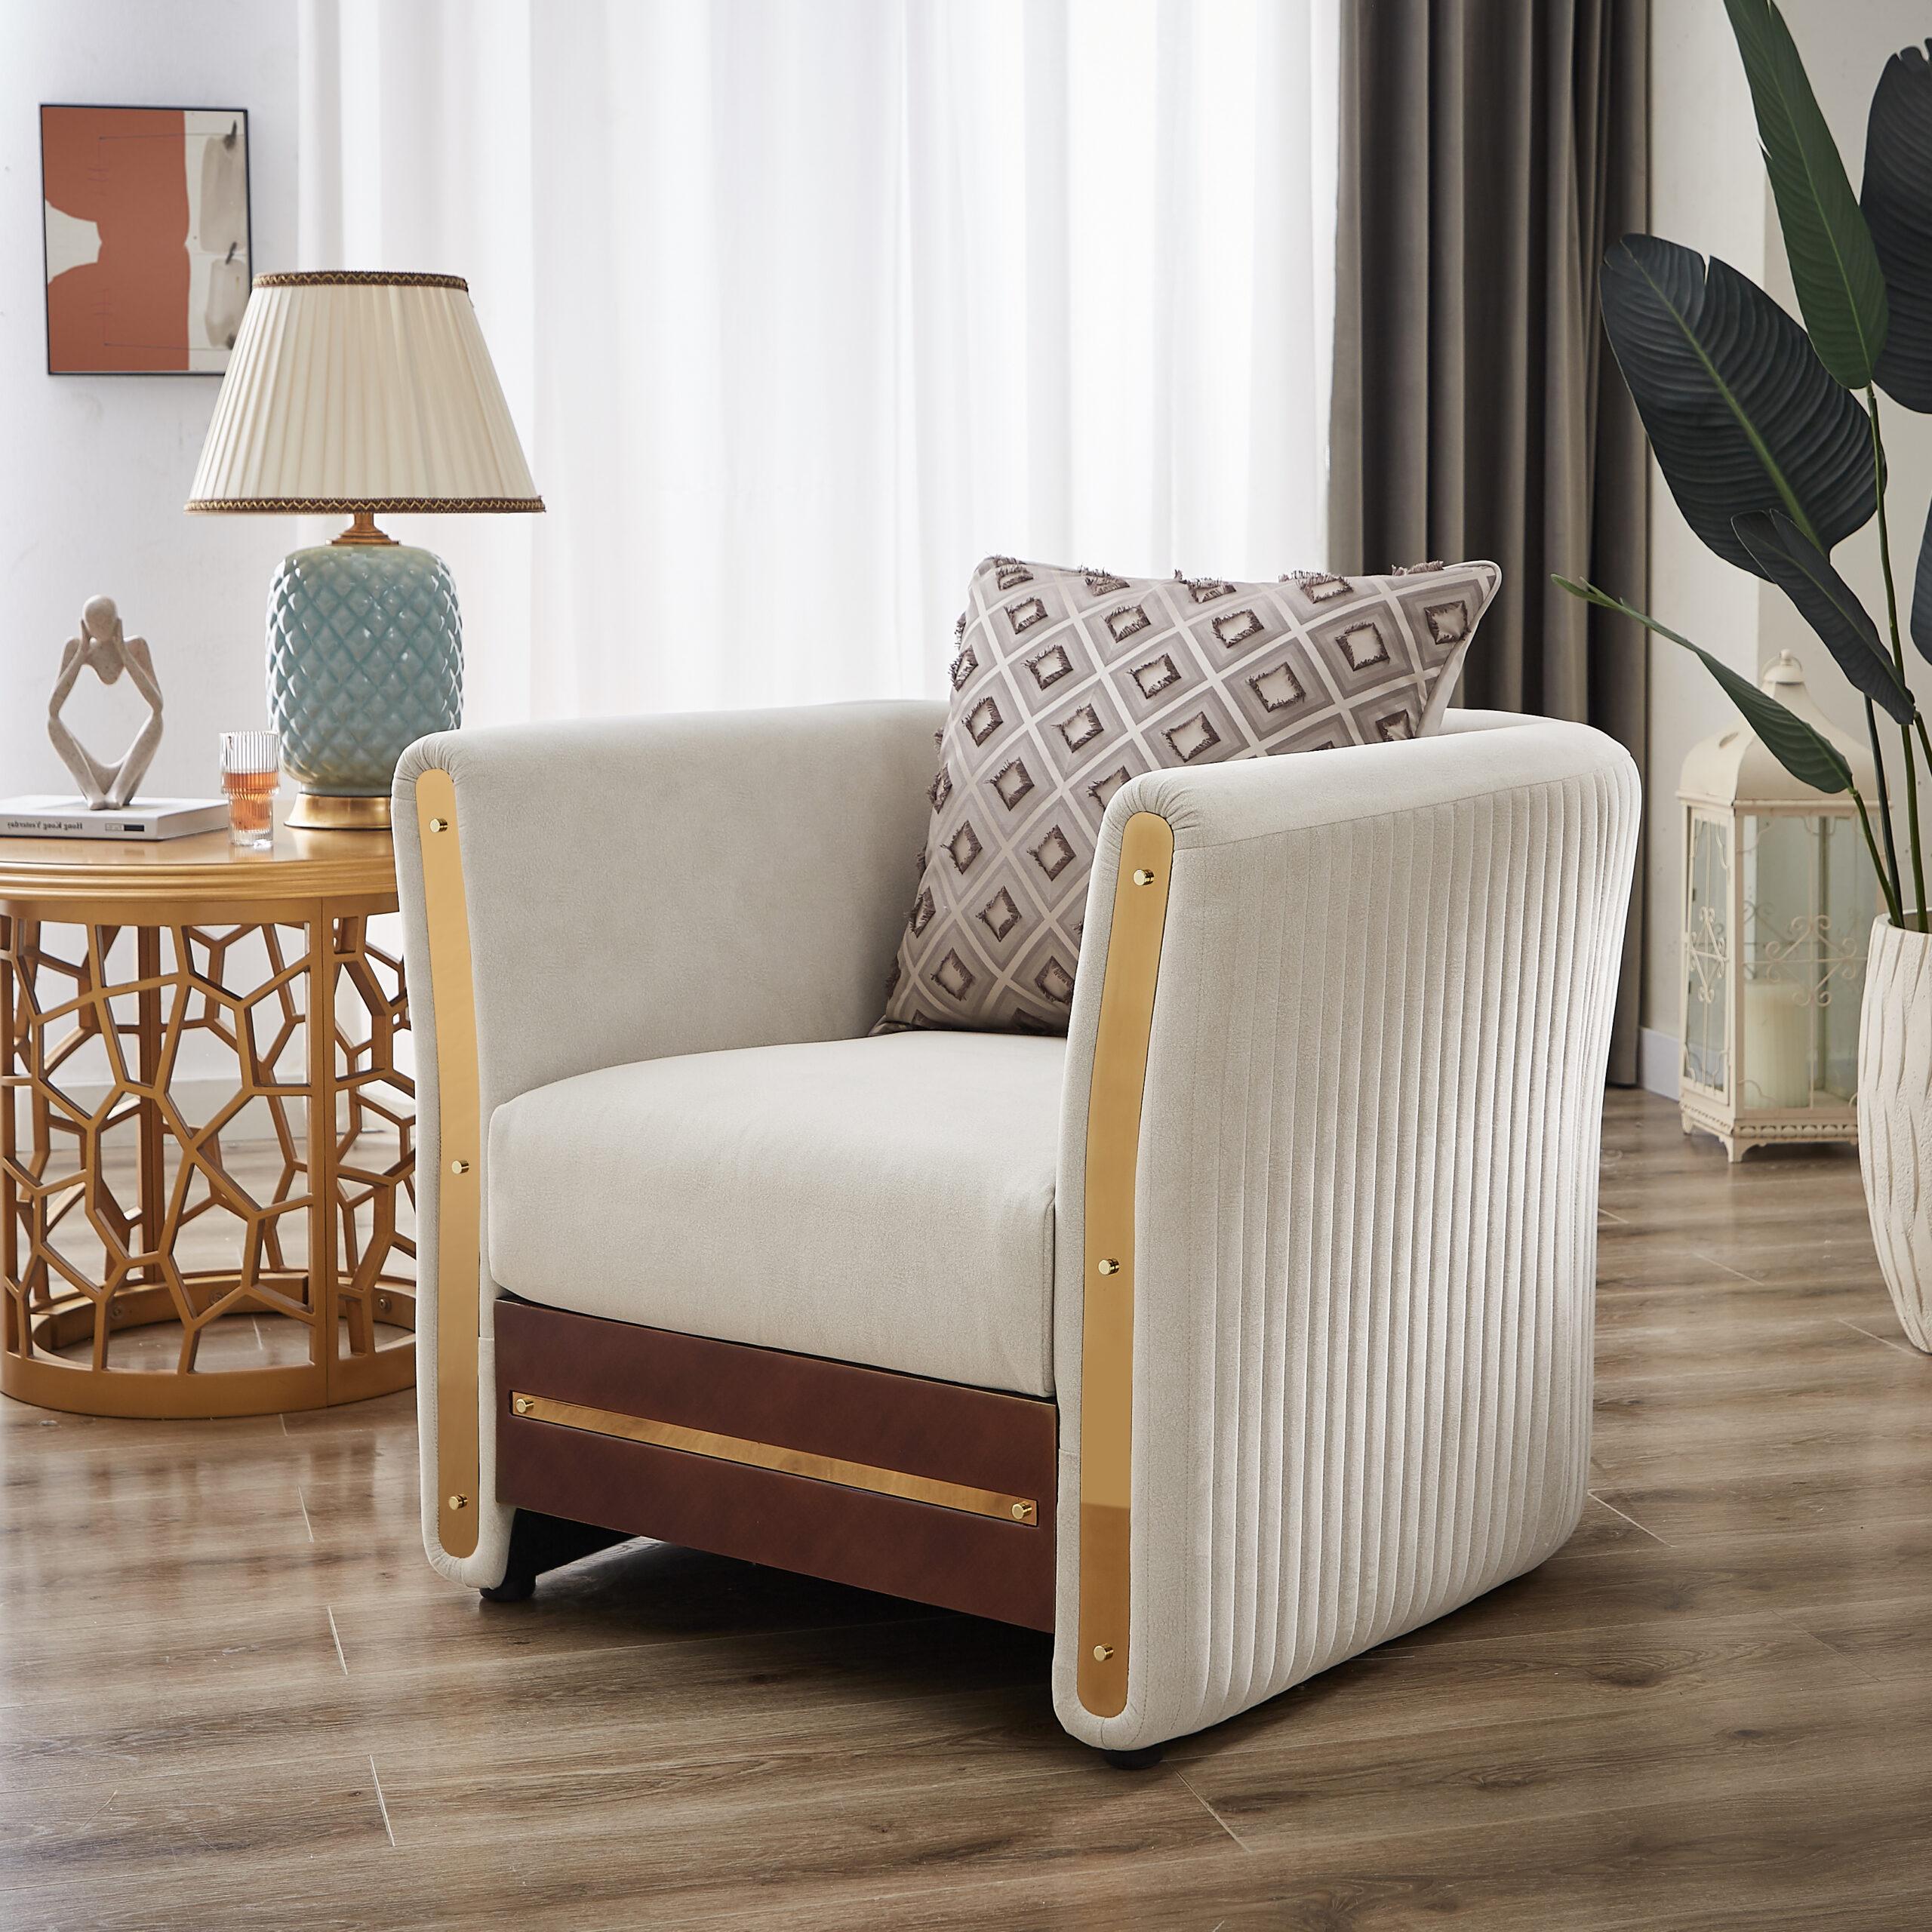 Classic, Traditional Chair HD-9035 Chair HD-C9035 HD-C9035 in White, Gold Fabric